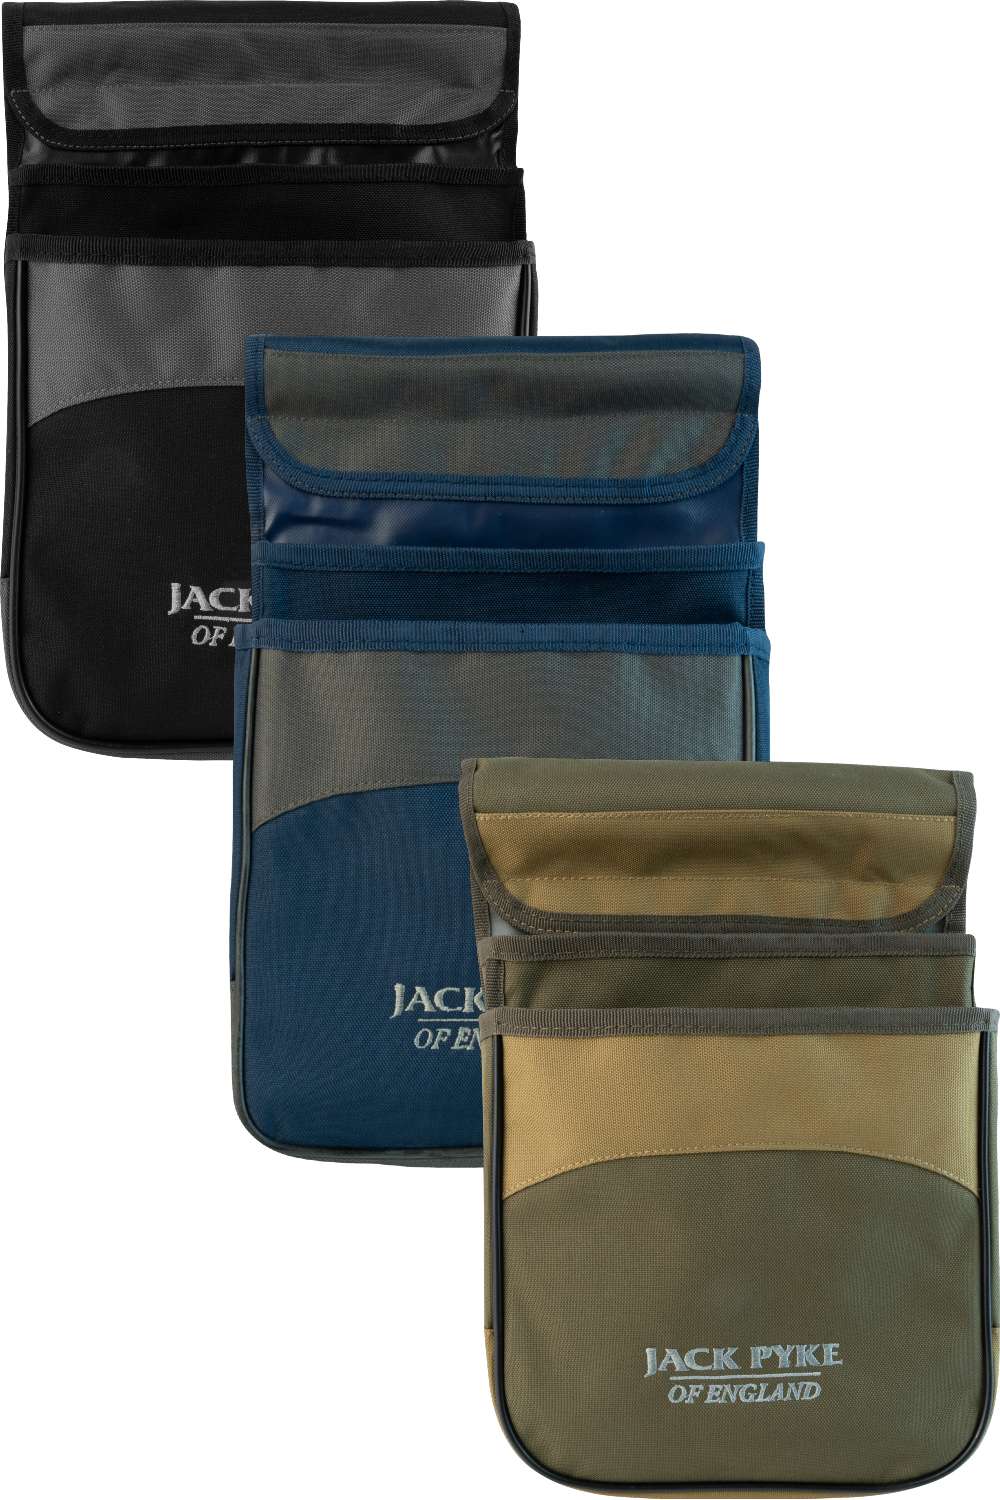 Jack Pyke Sporting Cartridge Pouch in Black, Blue and Green